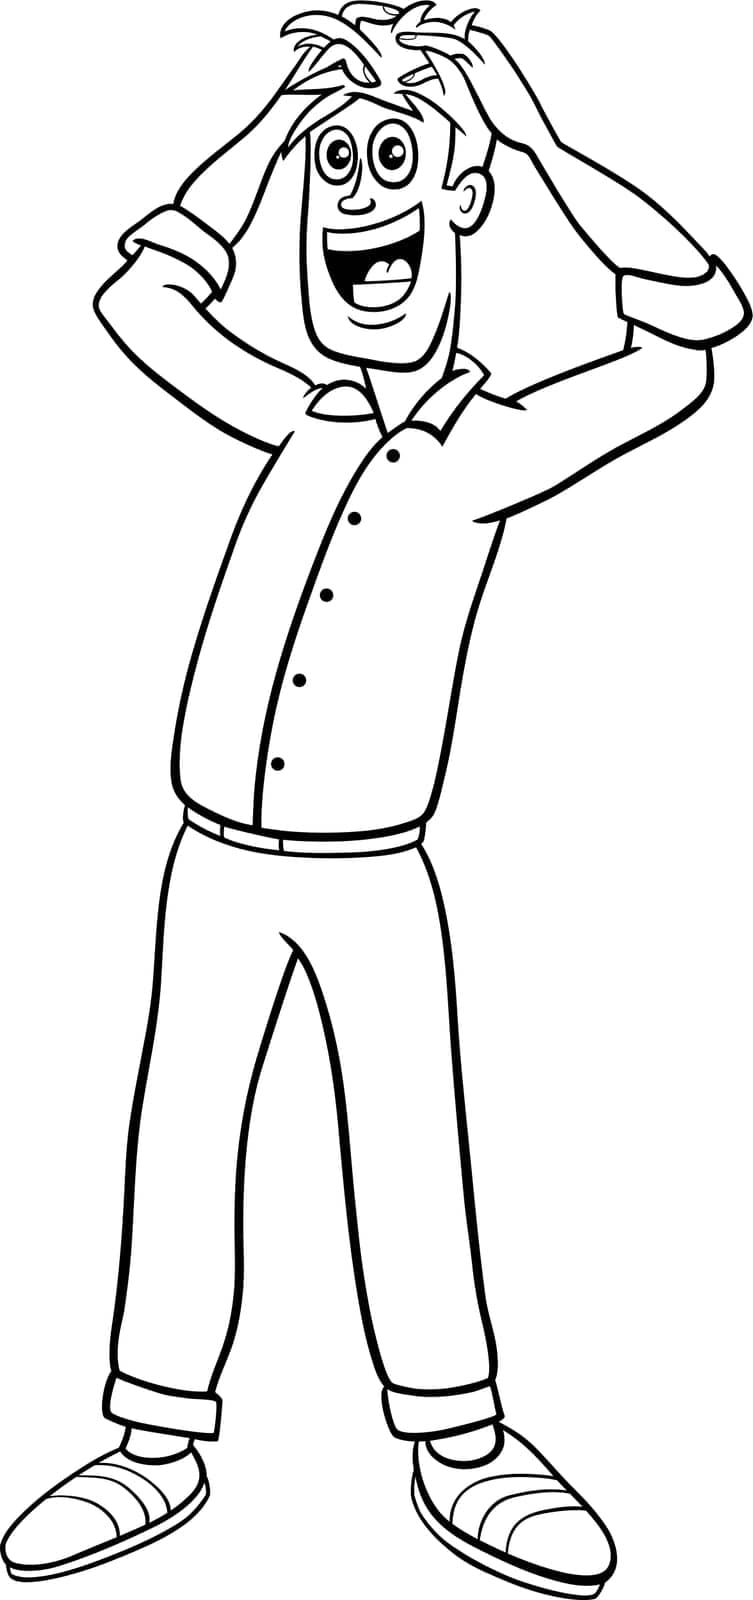 happy or surprised cartoon young man character coloring page by izakowski